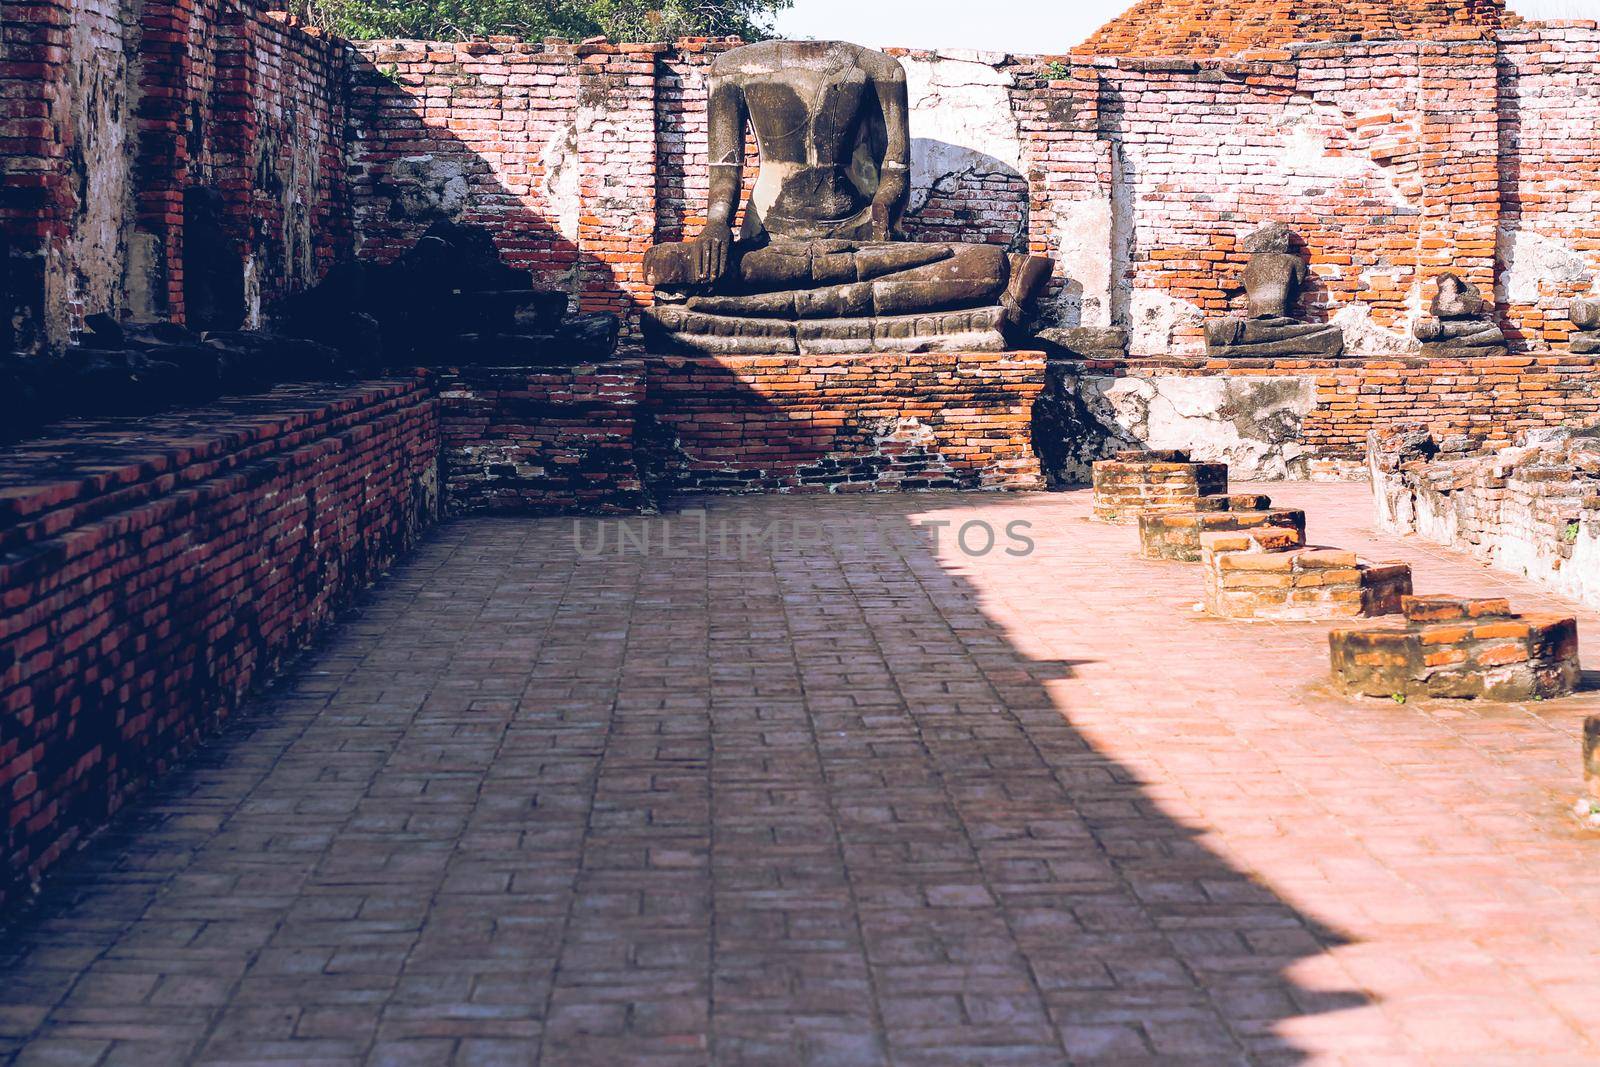 Remnants of the ancient ruins of Wat Chaiwatthanaram, part of the famous Ayutthaya Historical Park in Thailand